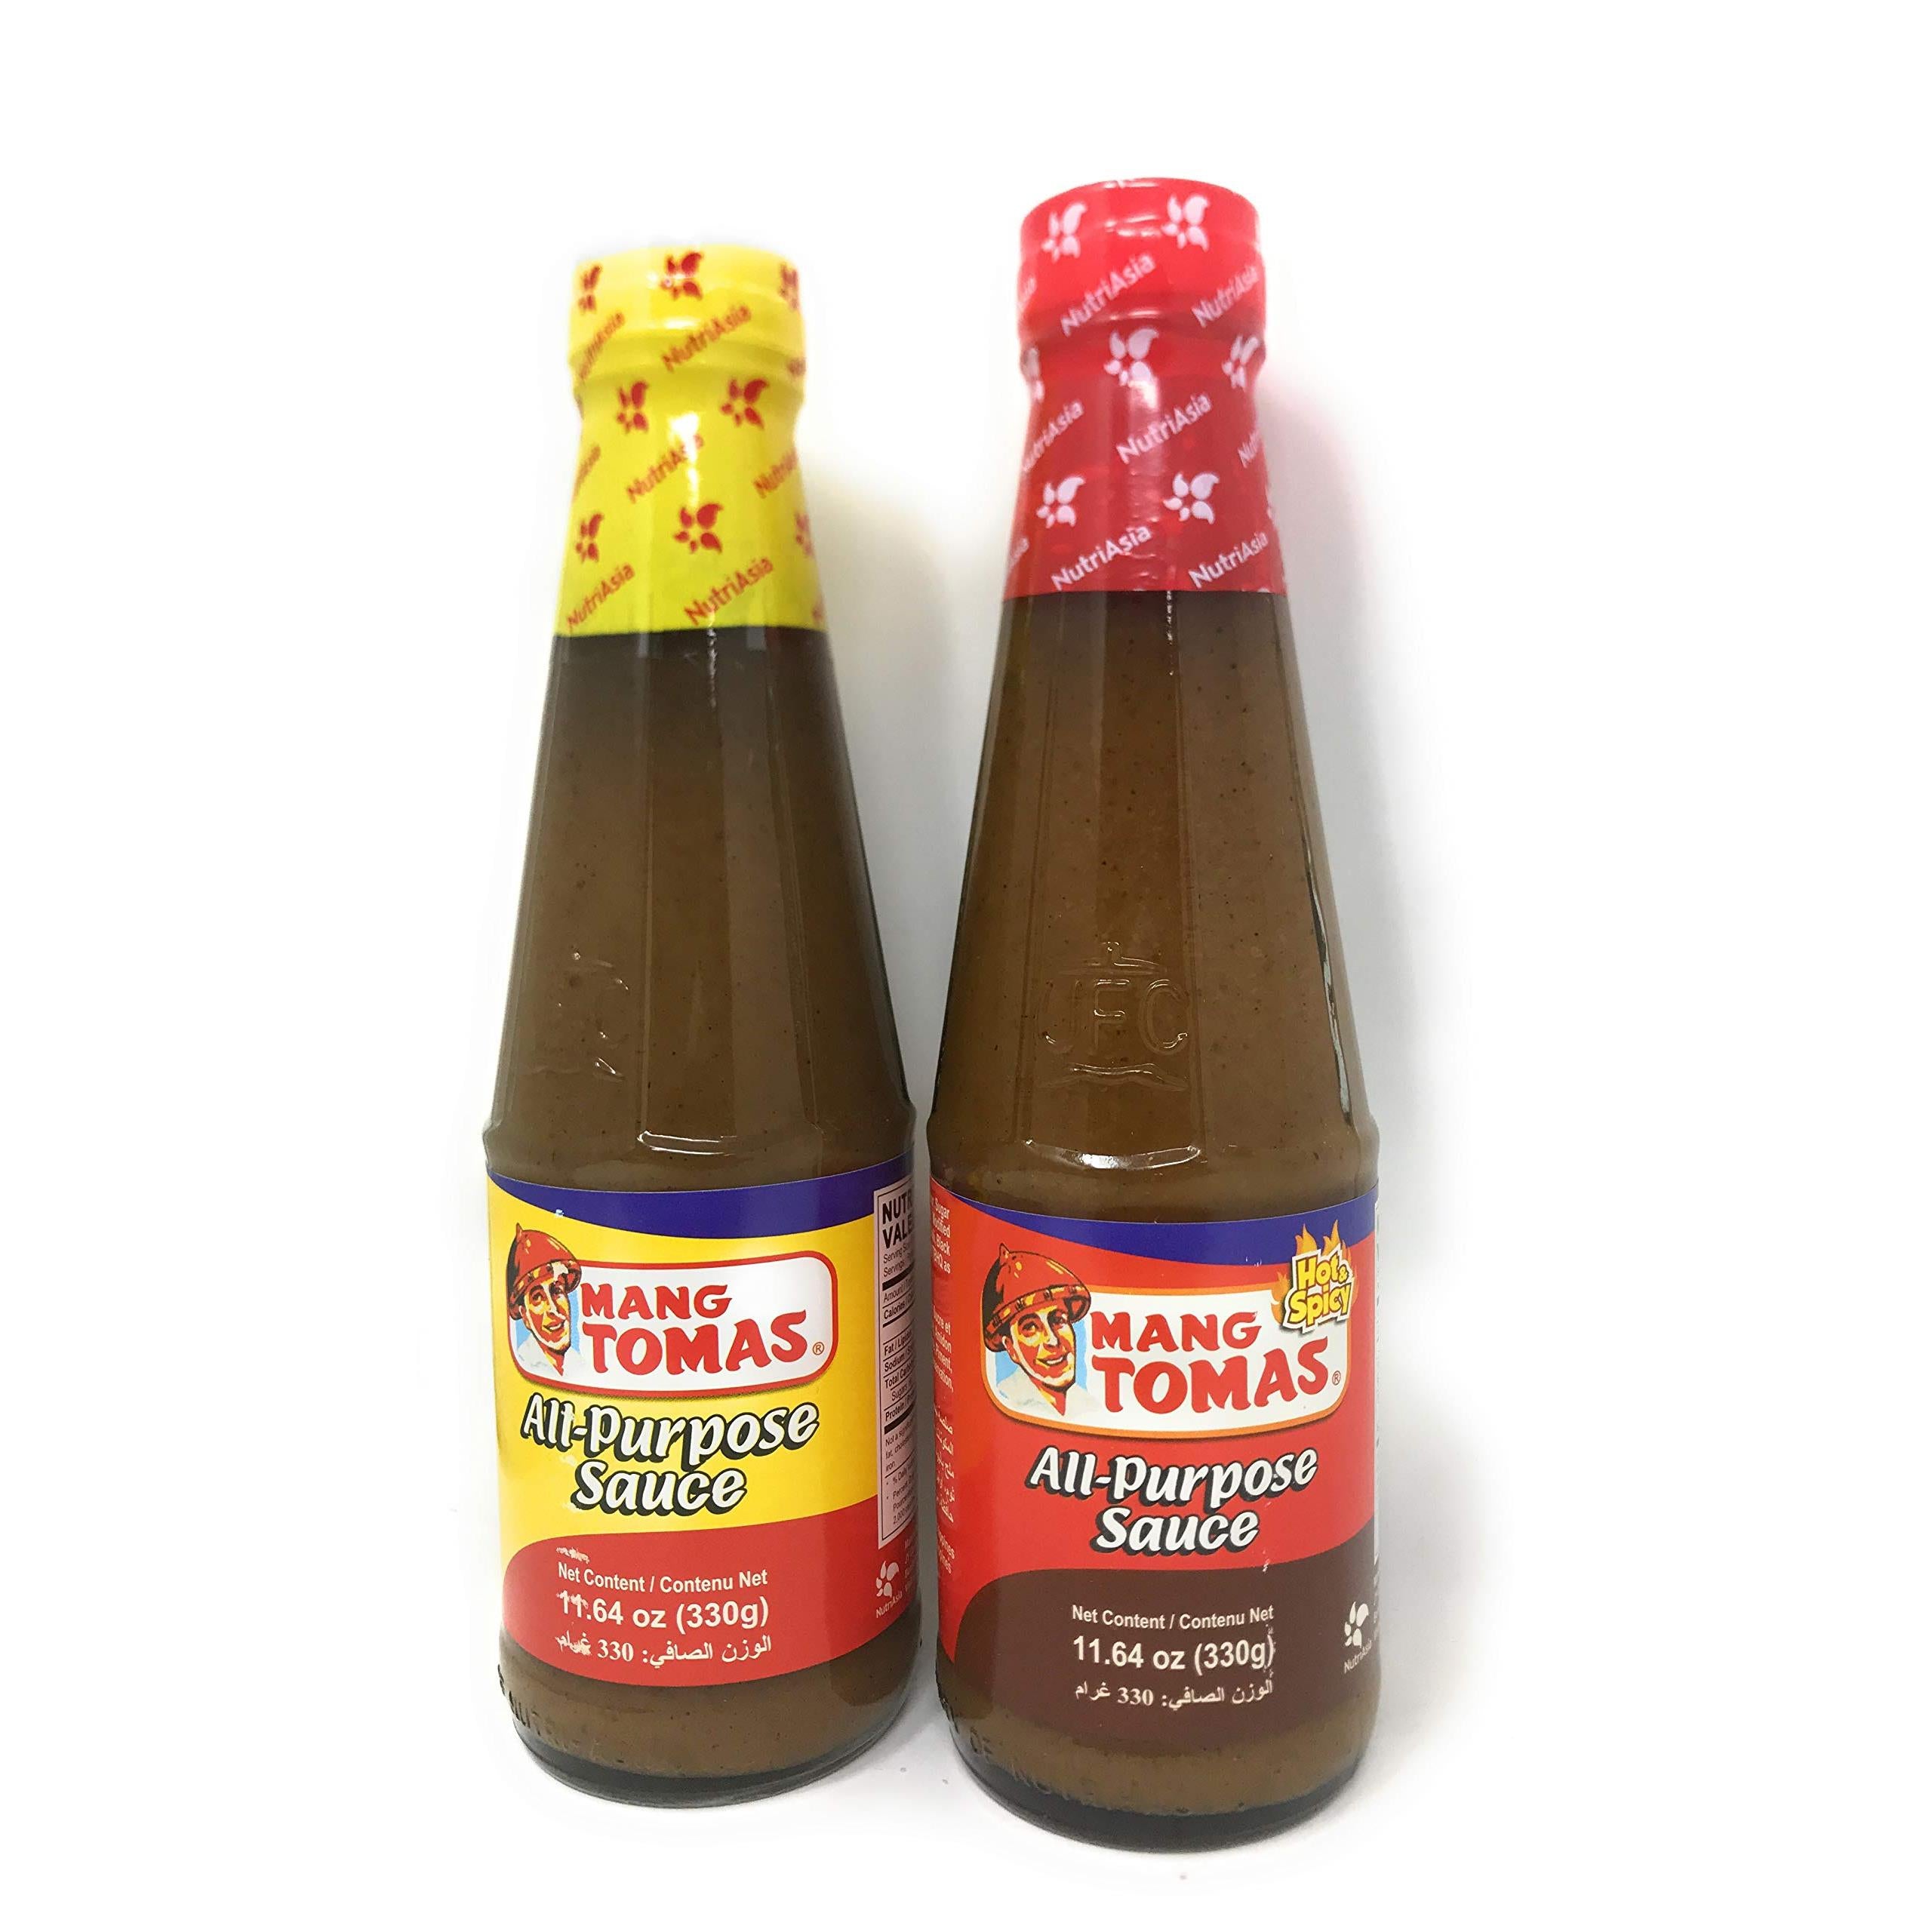 Mang Tomas All Purpose Sauce (Original and Hot & Spicy), 11.64oz (330g), 2 Pack